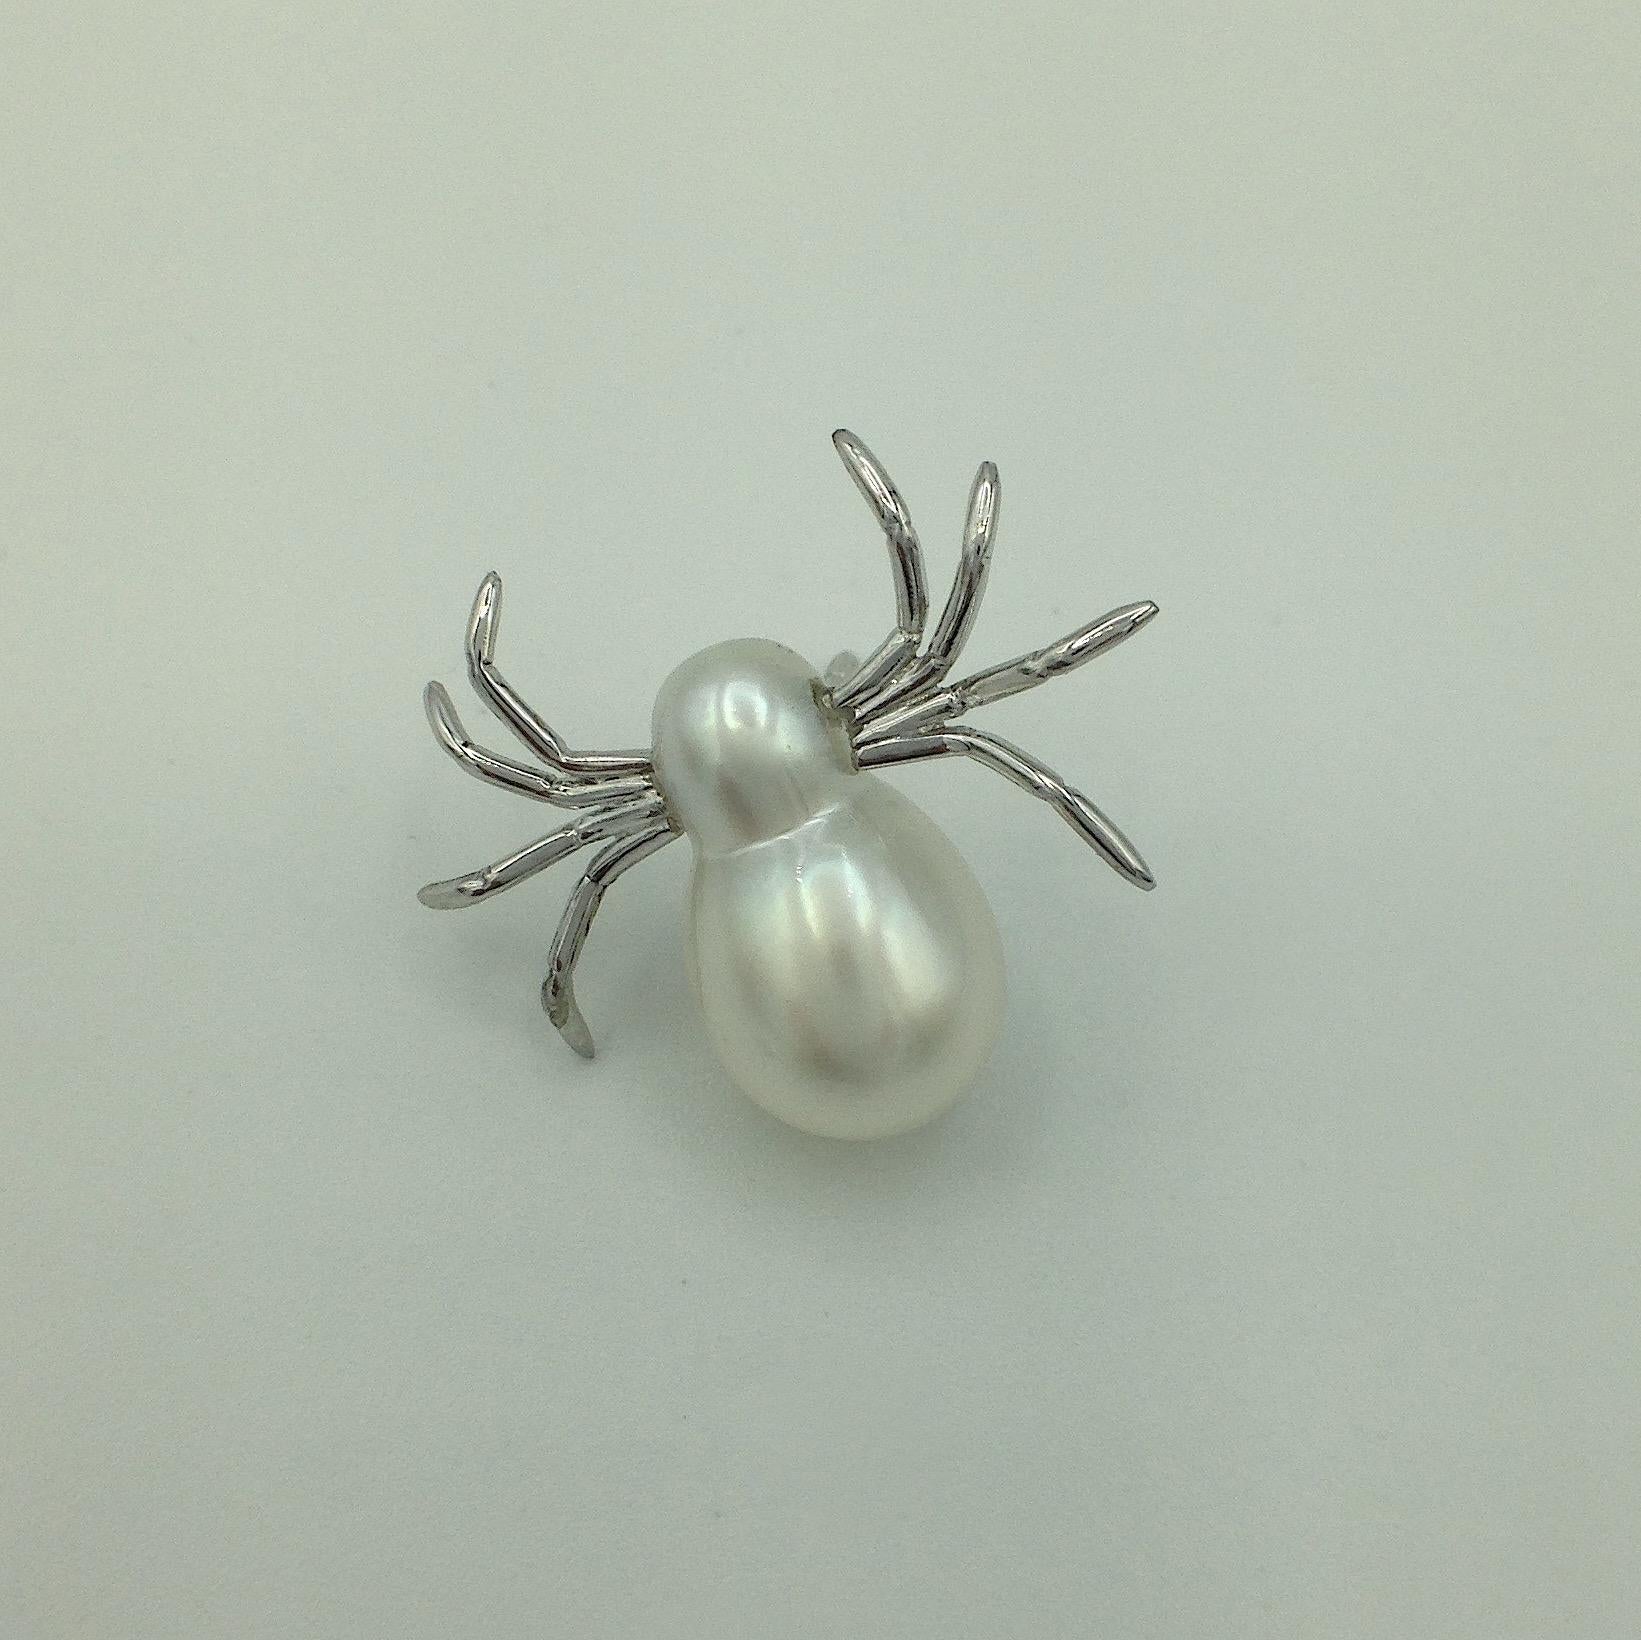 White 18 Karat White Gold Pearl Pin Spider Made in Italy
I use a little Australian pearl to create a spider brooch.
It's a nice jacket brooch, suitable for both men and women
The pearl is 16x9 mm.


